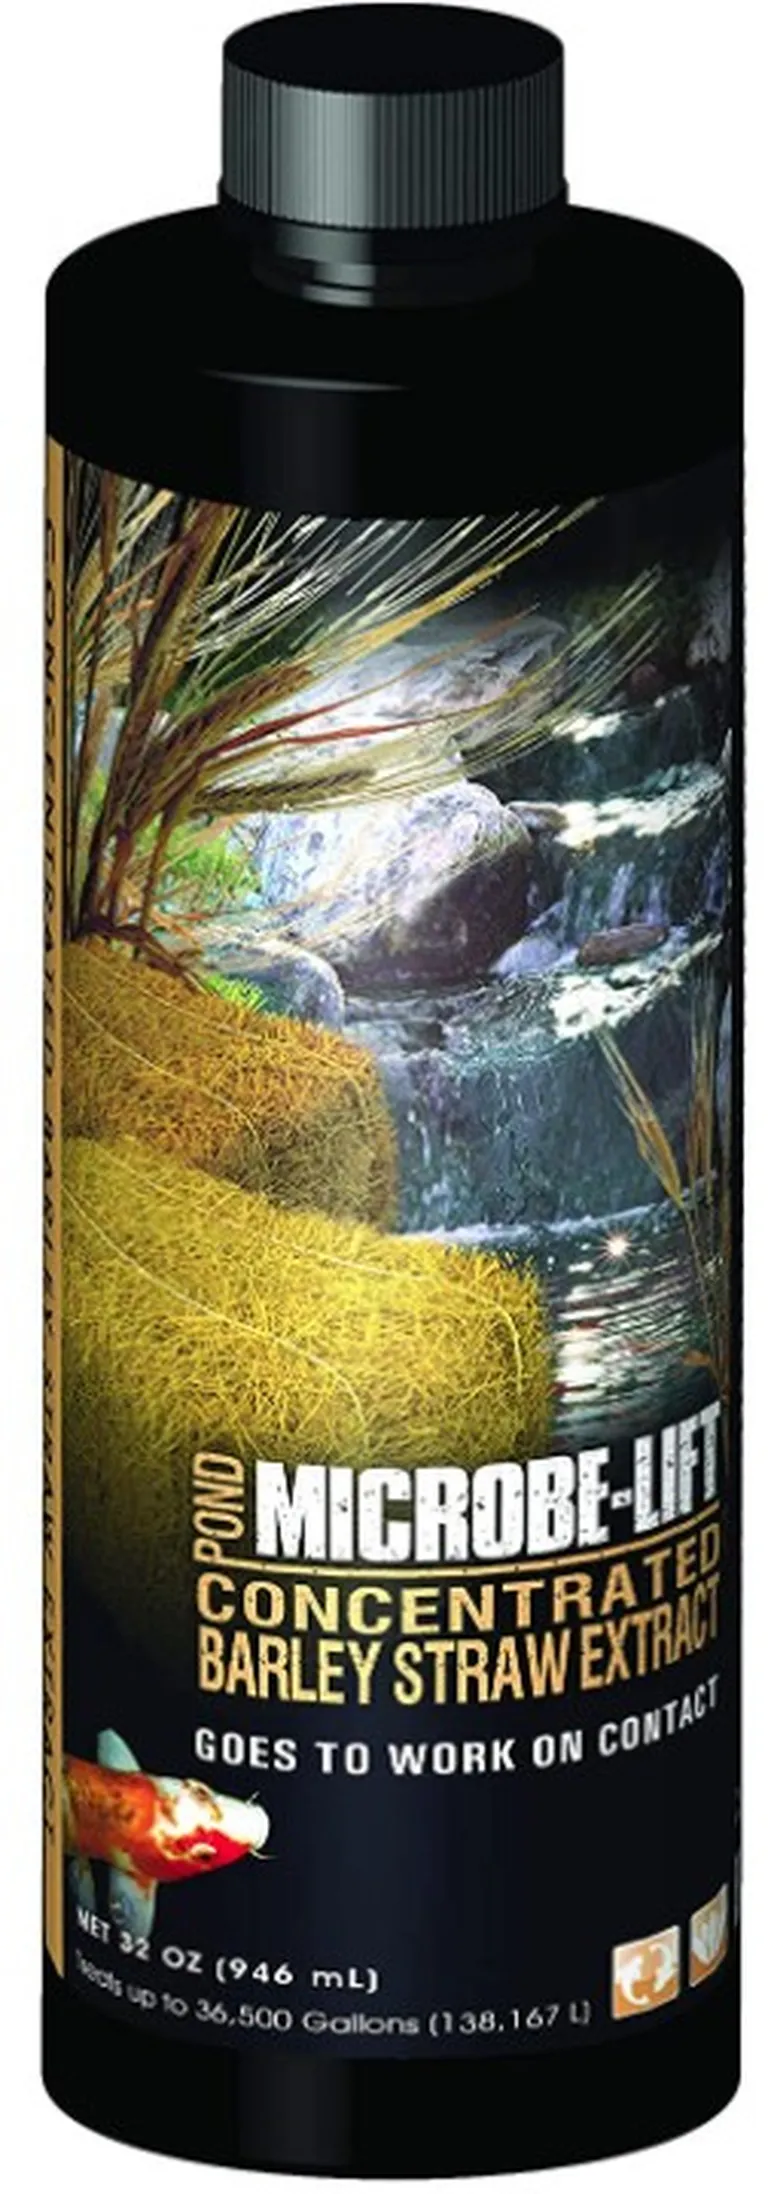 Microbe-Lift Barley Straw Concentrated Extract Photo 1